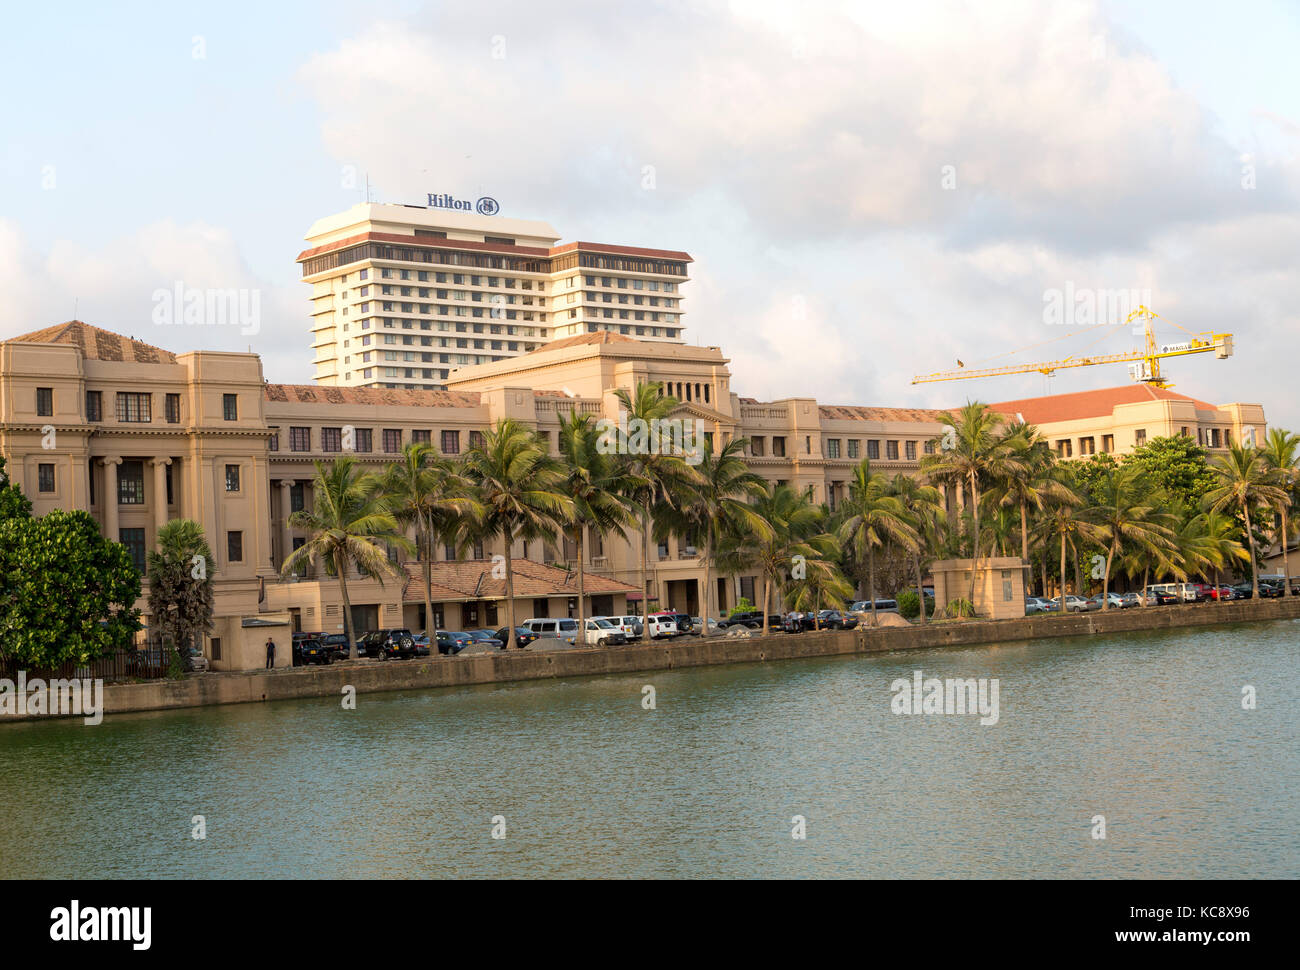 Hilton hotel and government office on waterfront, Colombo, Sri Lanka Stock Photo